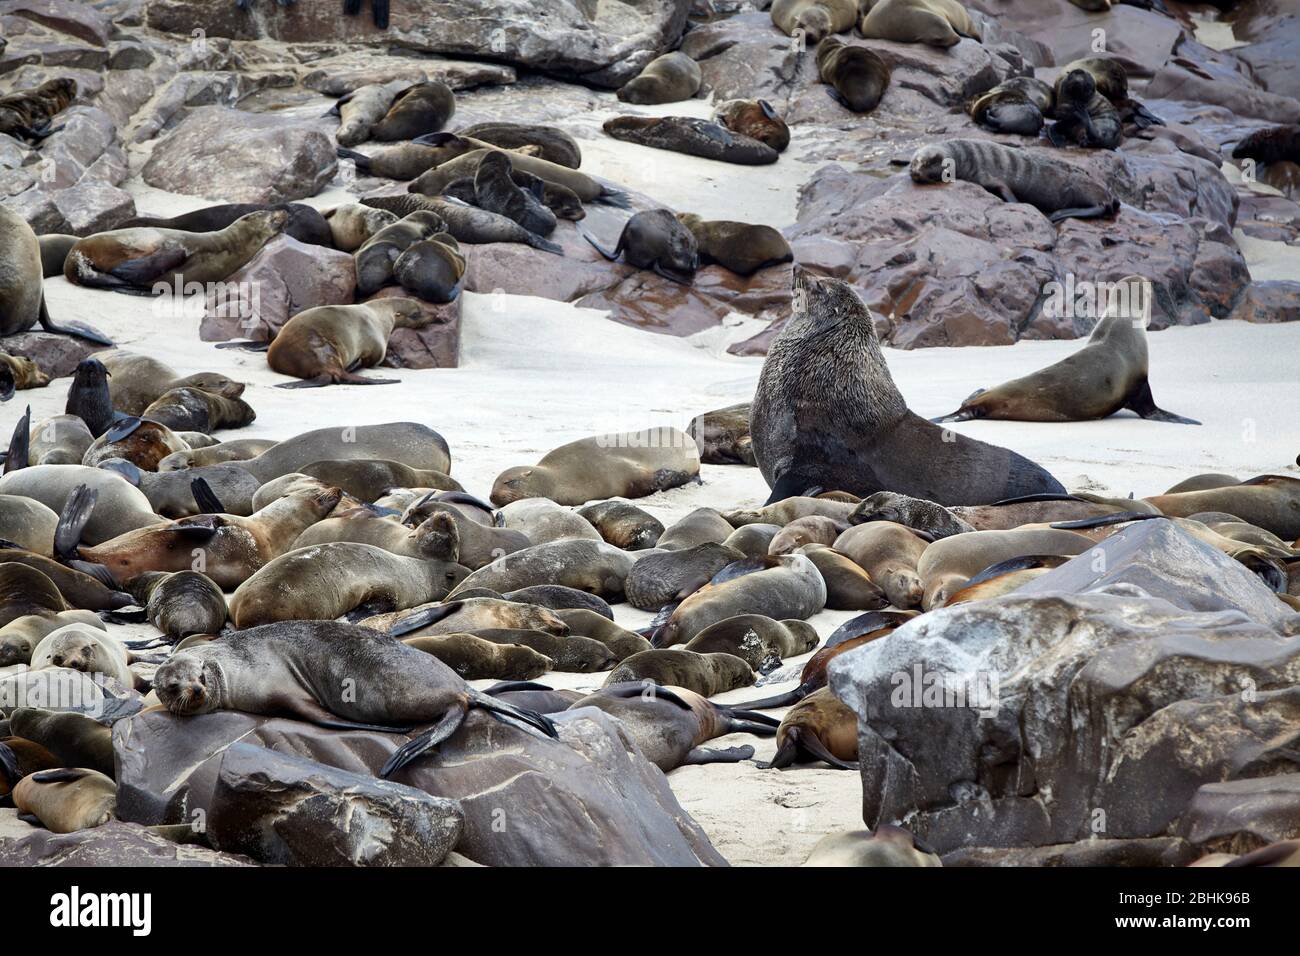 The proud king among his harem. Seals at the Cape Cross Seal Reserve. Stock Photo